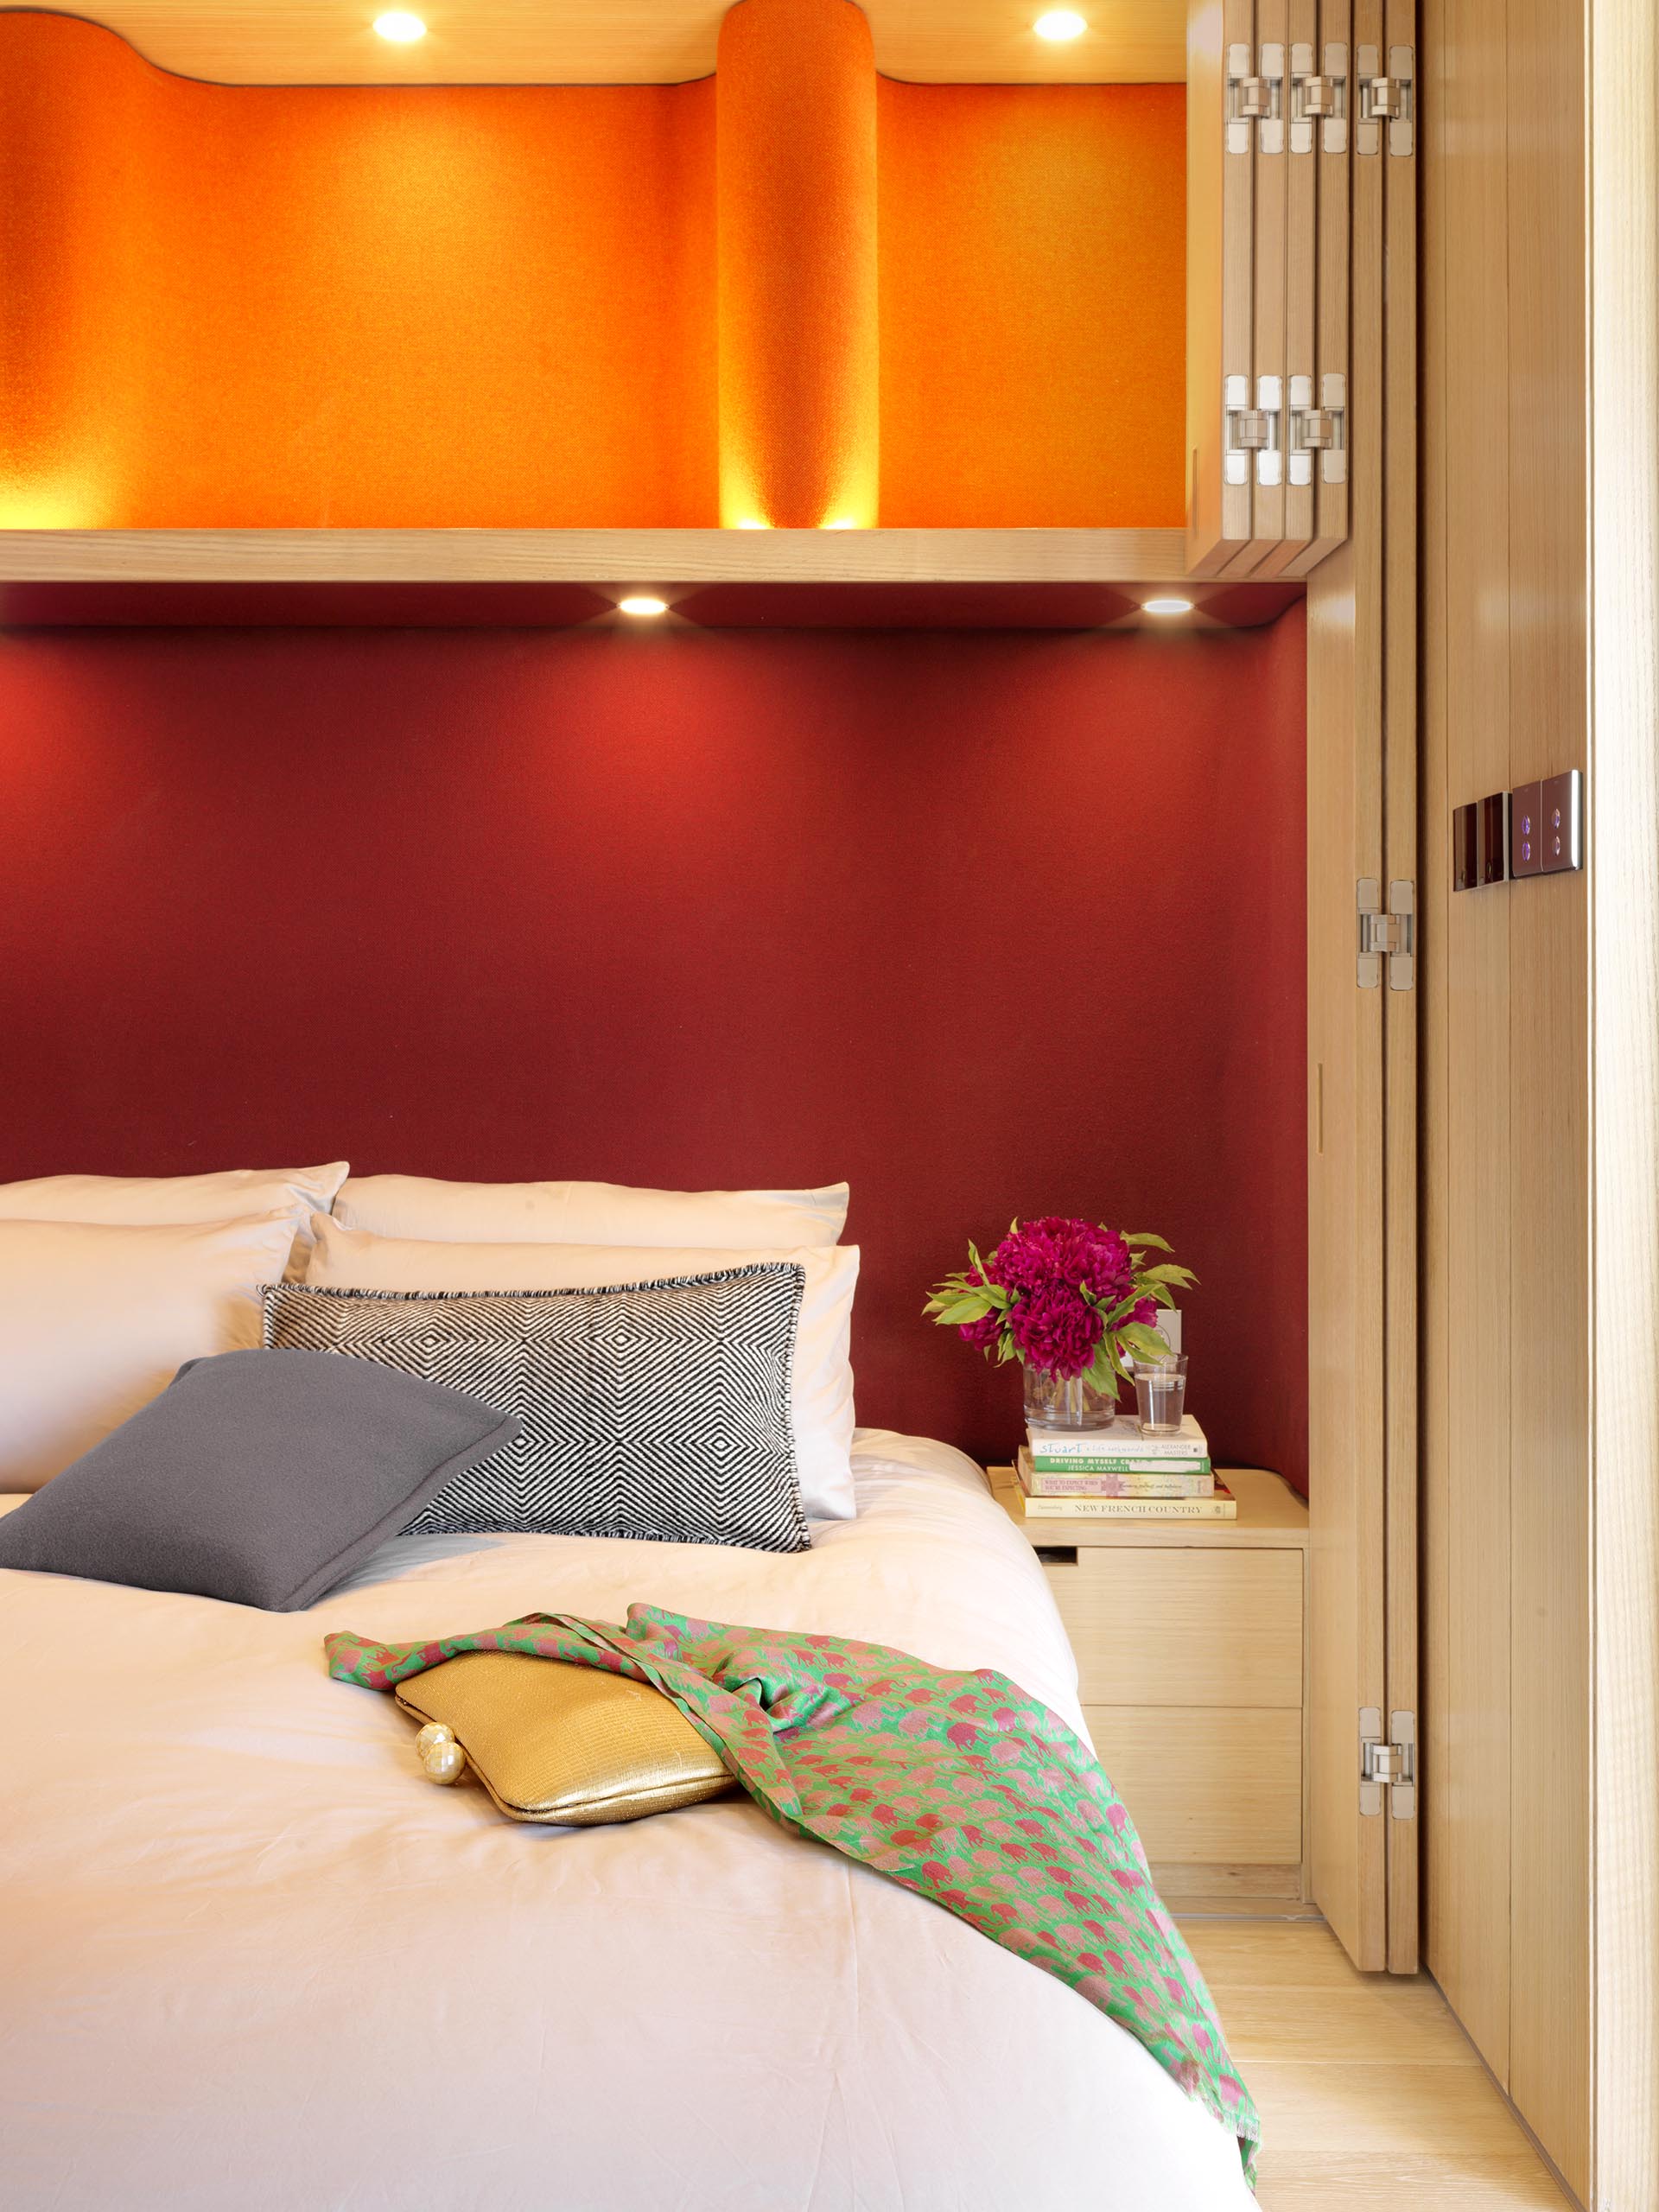 A dark red headboard sits below cabinets with an orange backdrop.